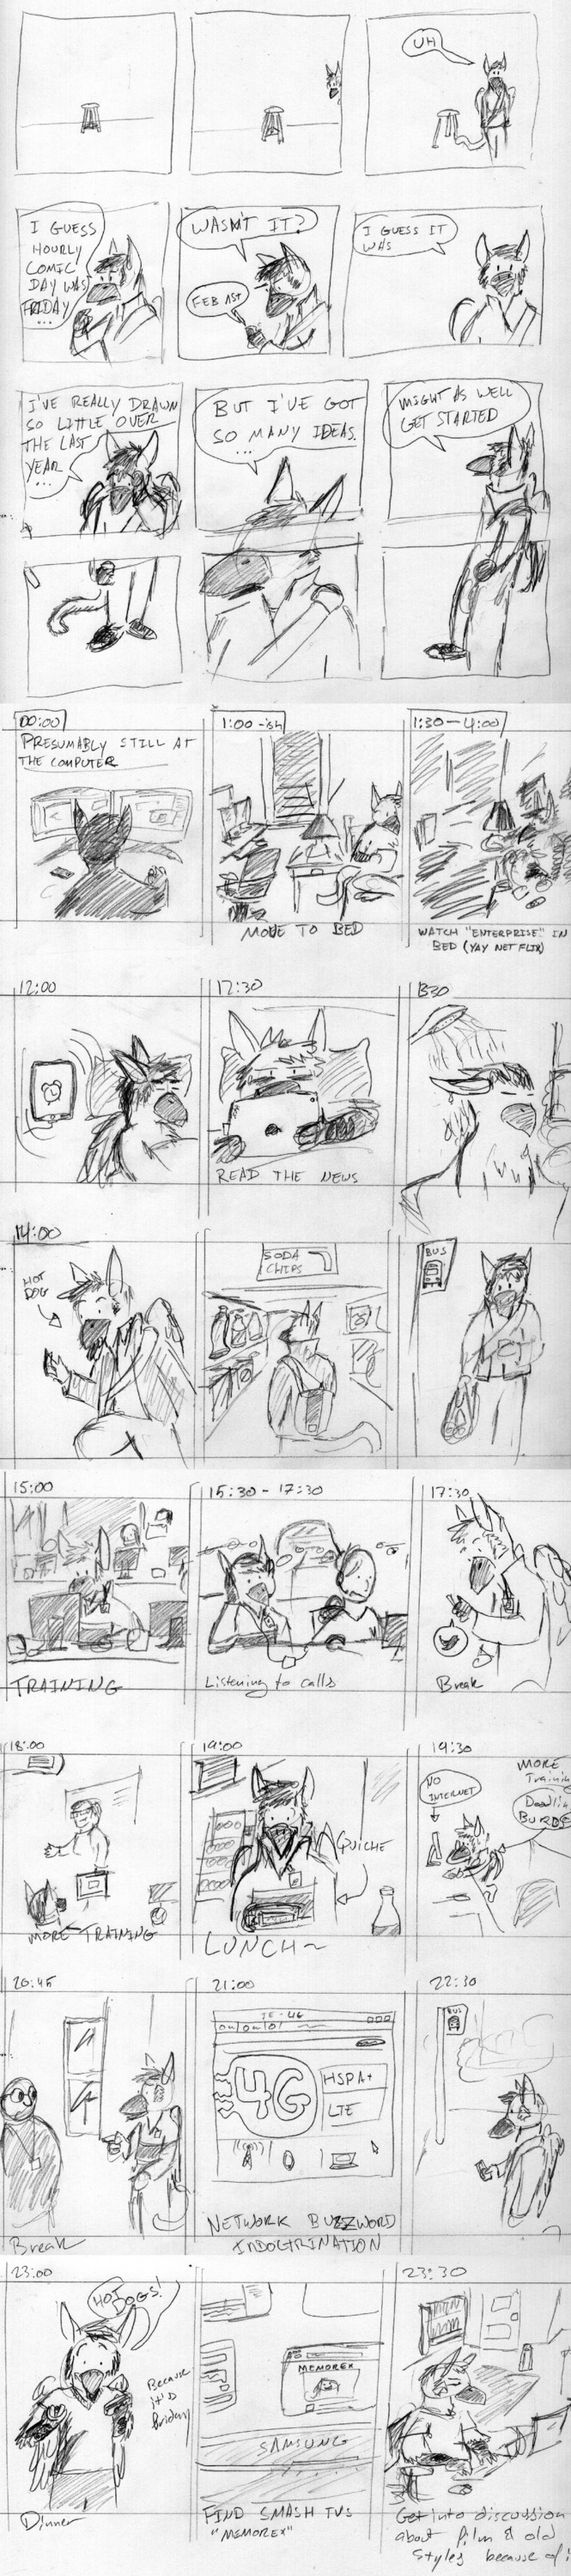 Hourly Comix Day 2013